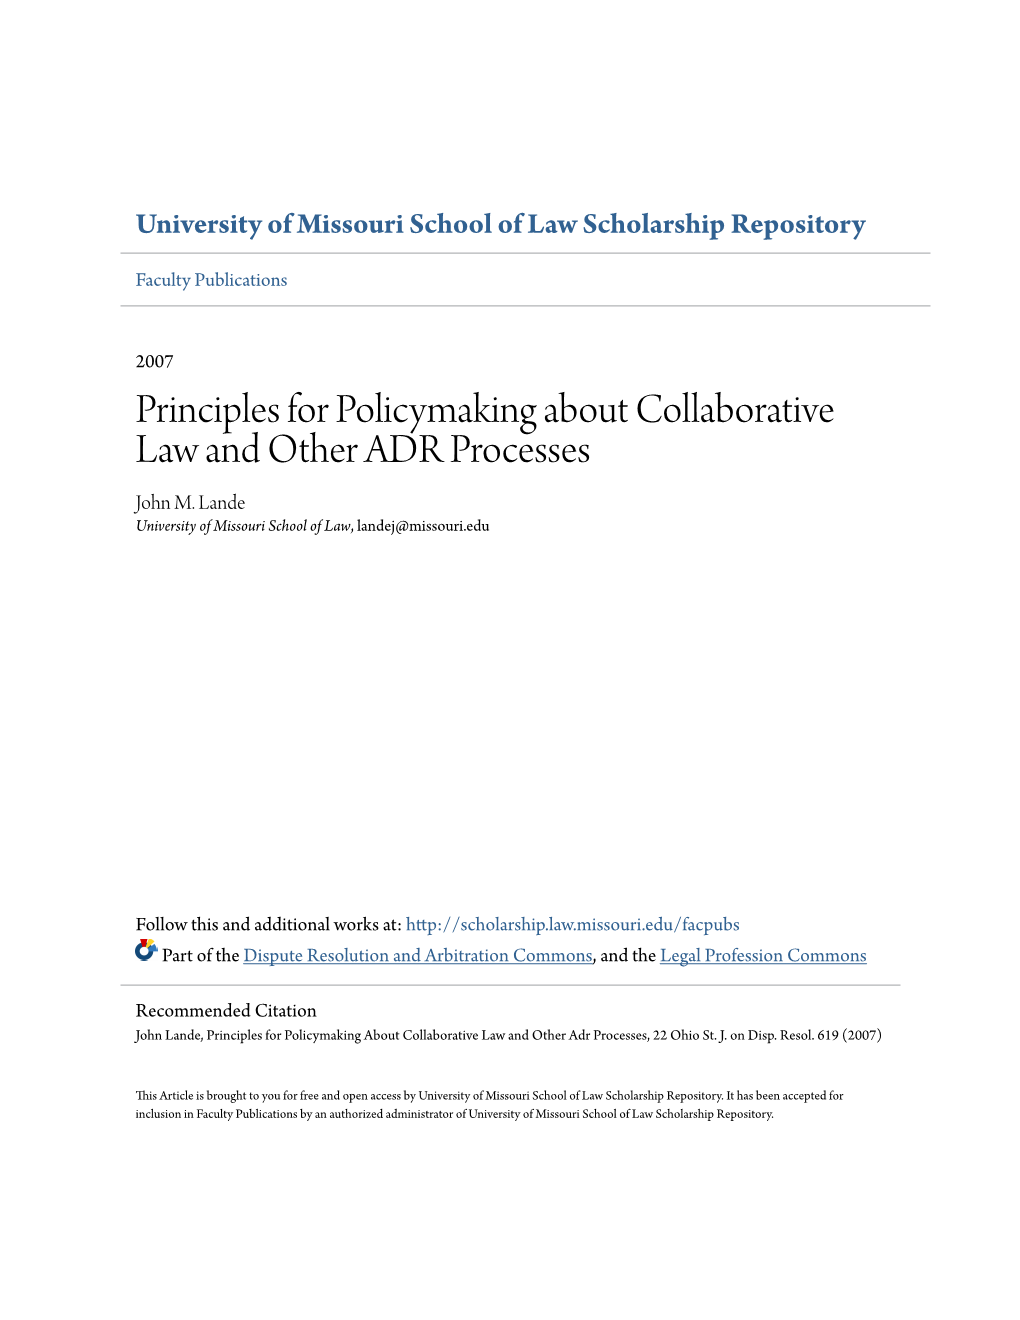 Principles for Policymaking About Collaborative Law and Other ADR Processes John M